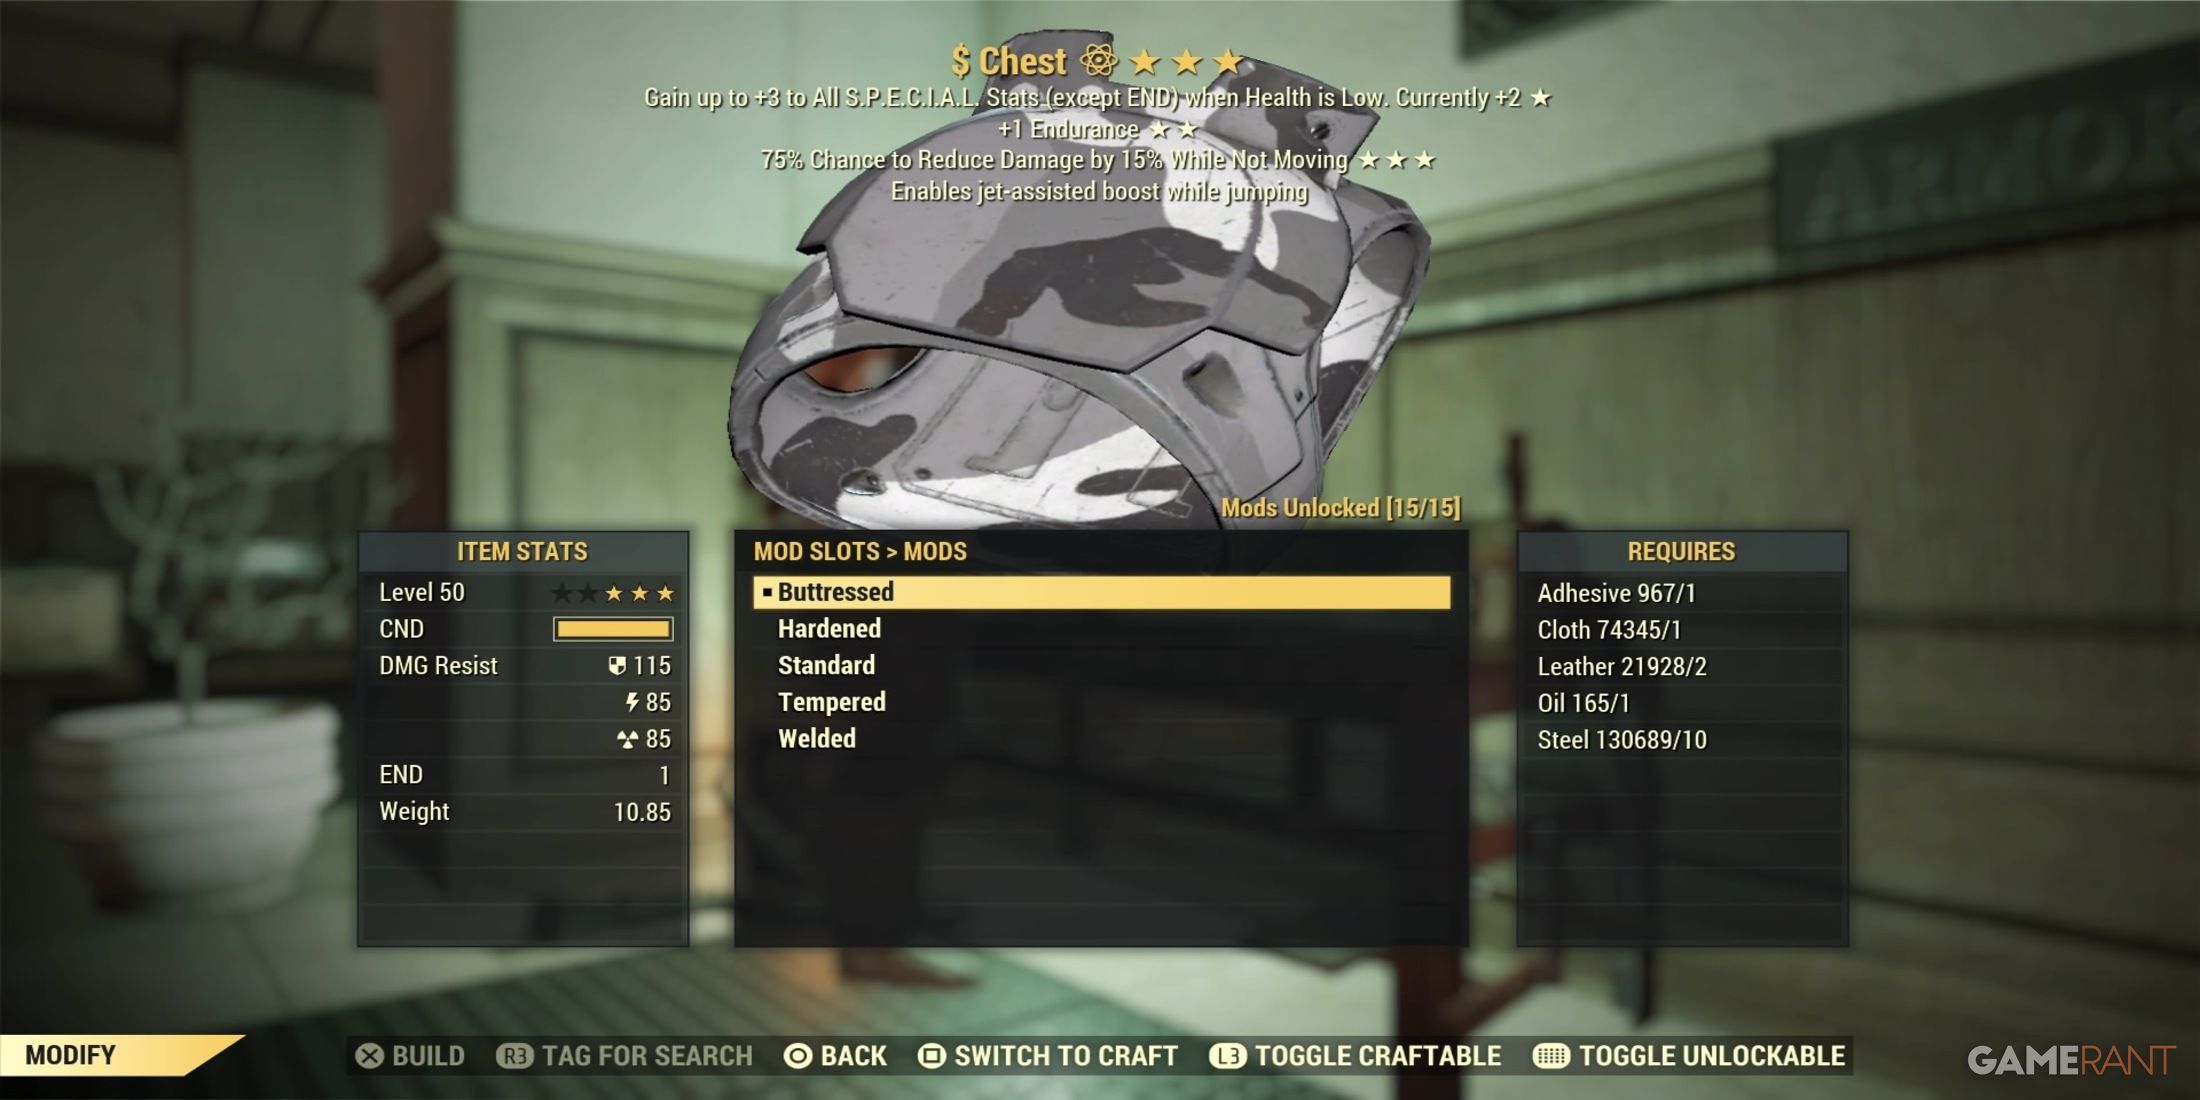 Adding Mods To Armor in Fallout 76